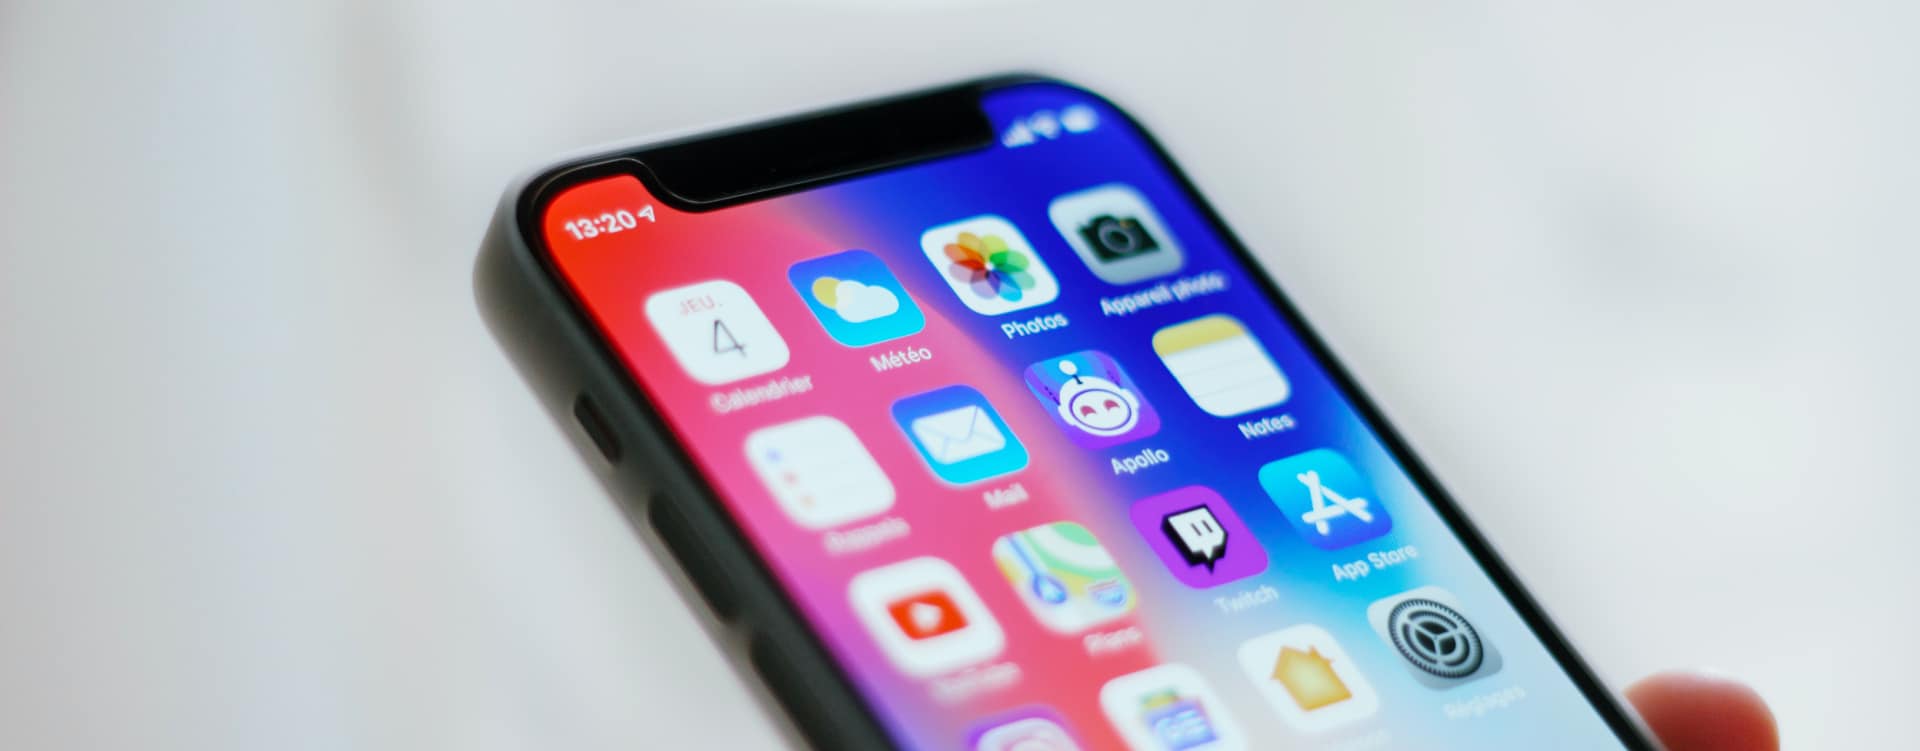 Download Cowabunga Jailbreak Alternative for iOS 150 up to iOS 1612 on All Devices